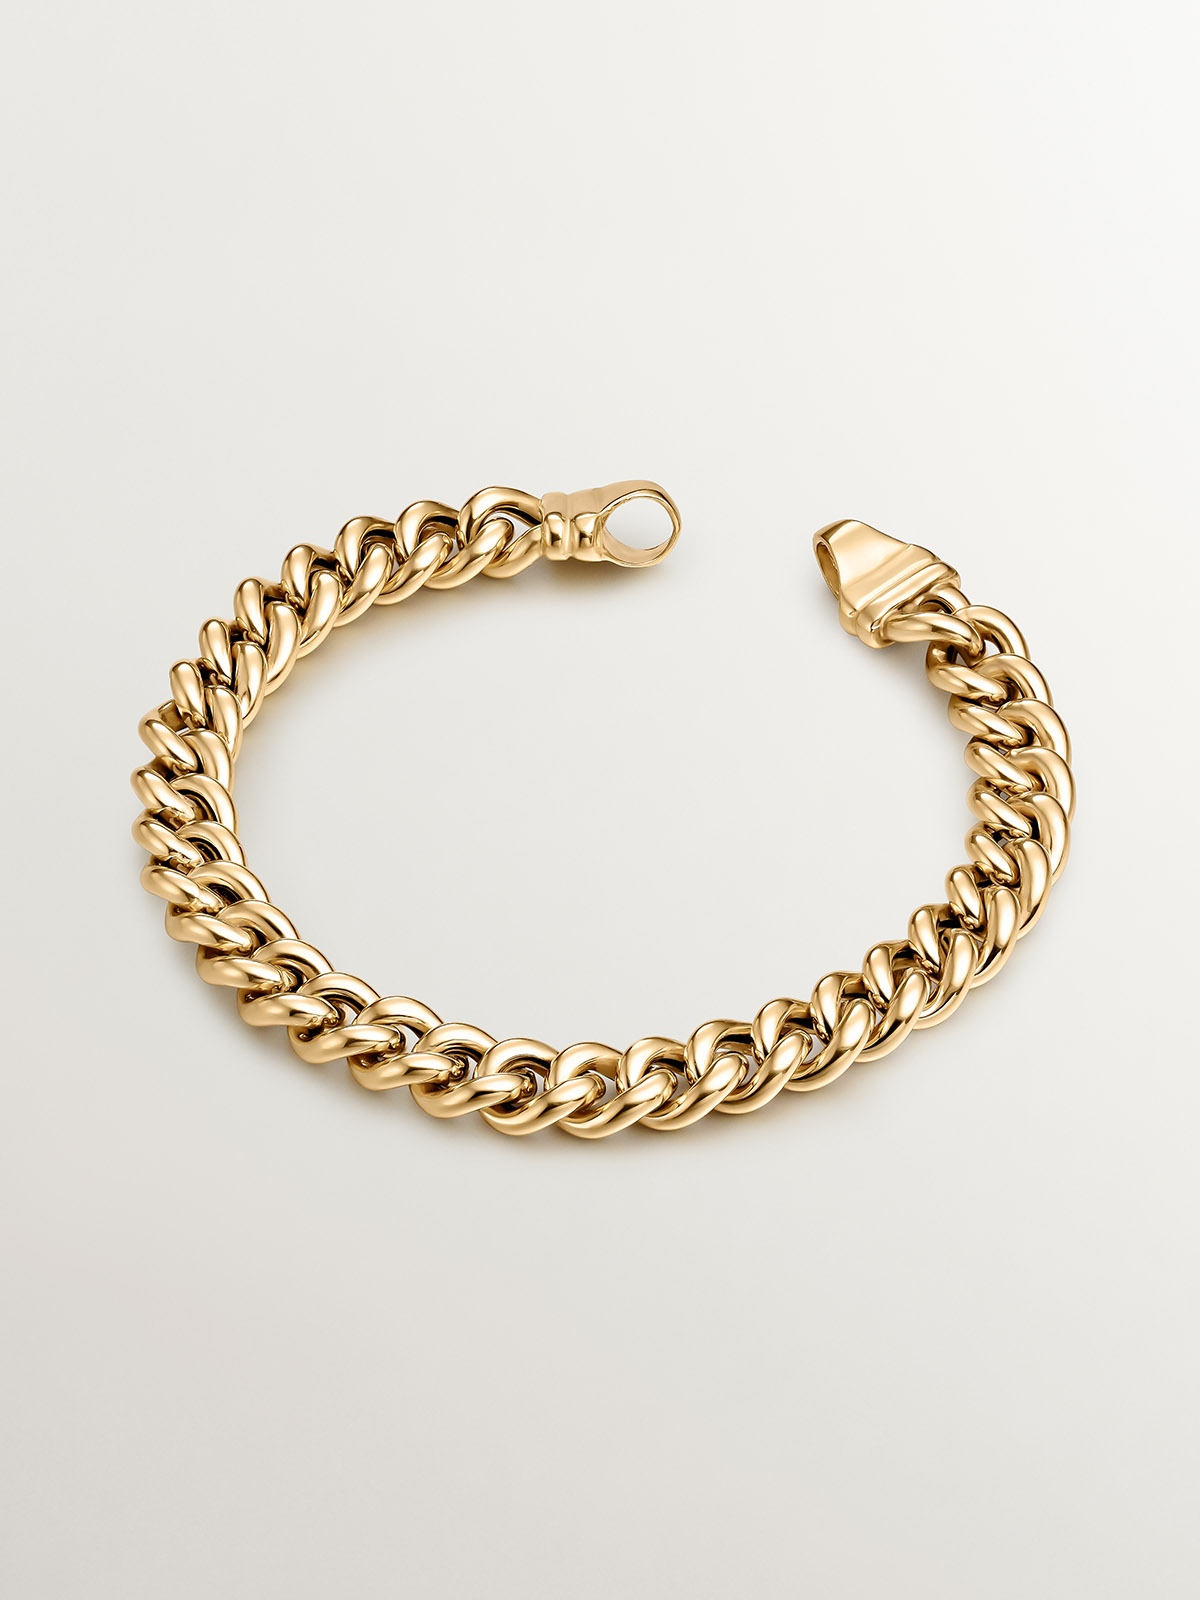 Barbados link chain bracelet in 925 silver plated in 18K yellow gold.